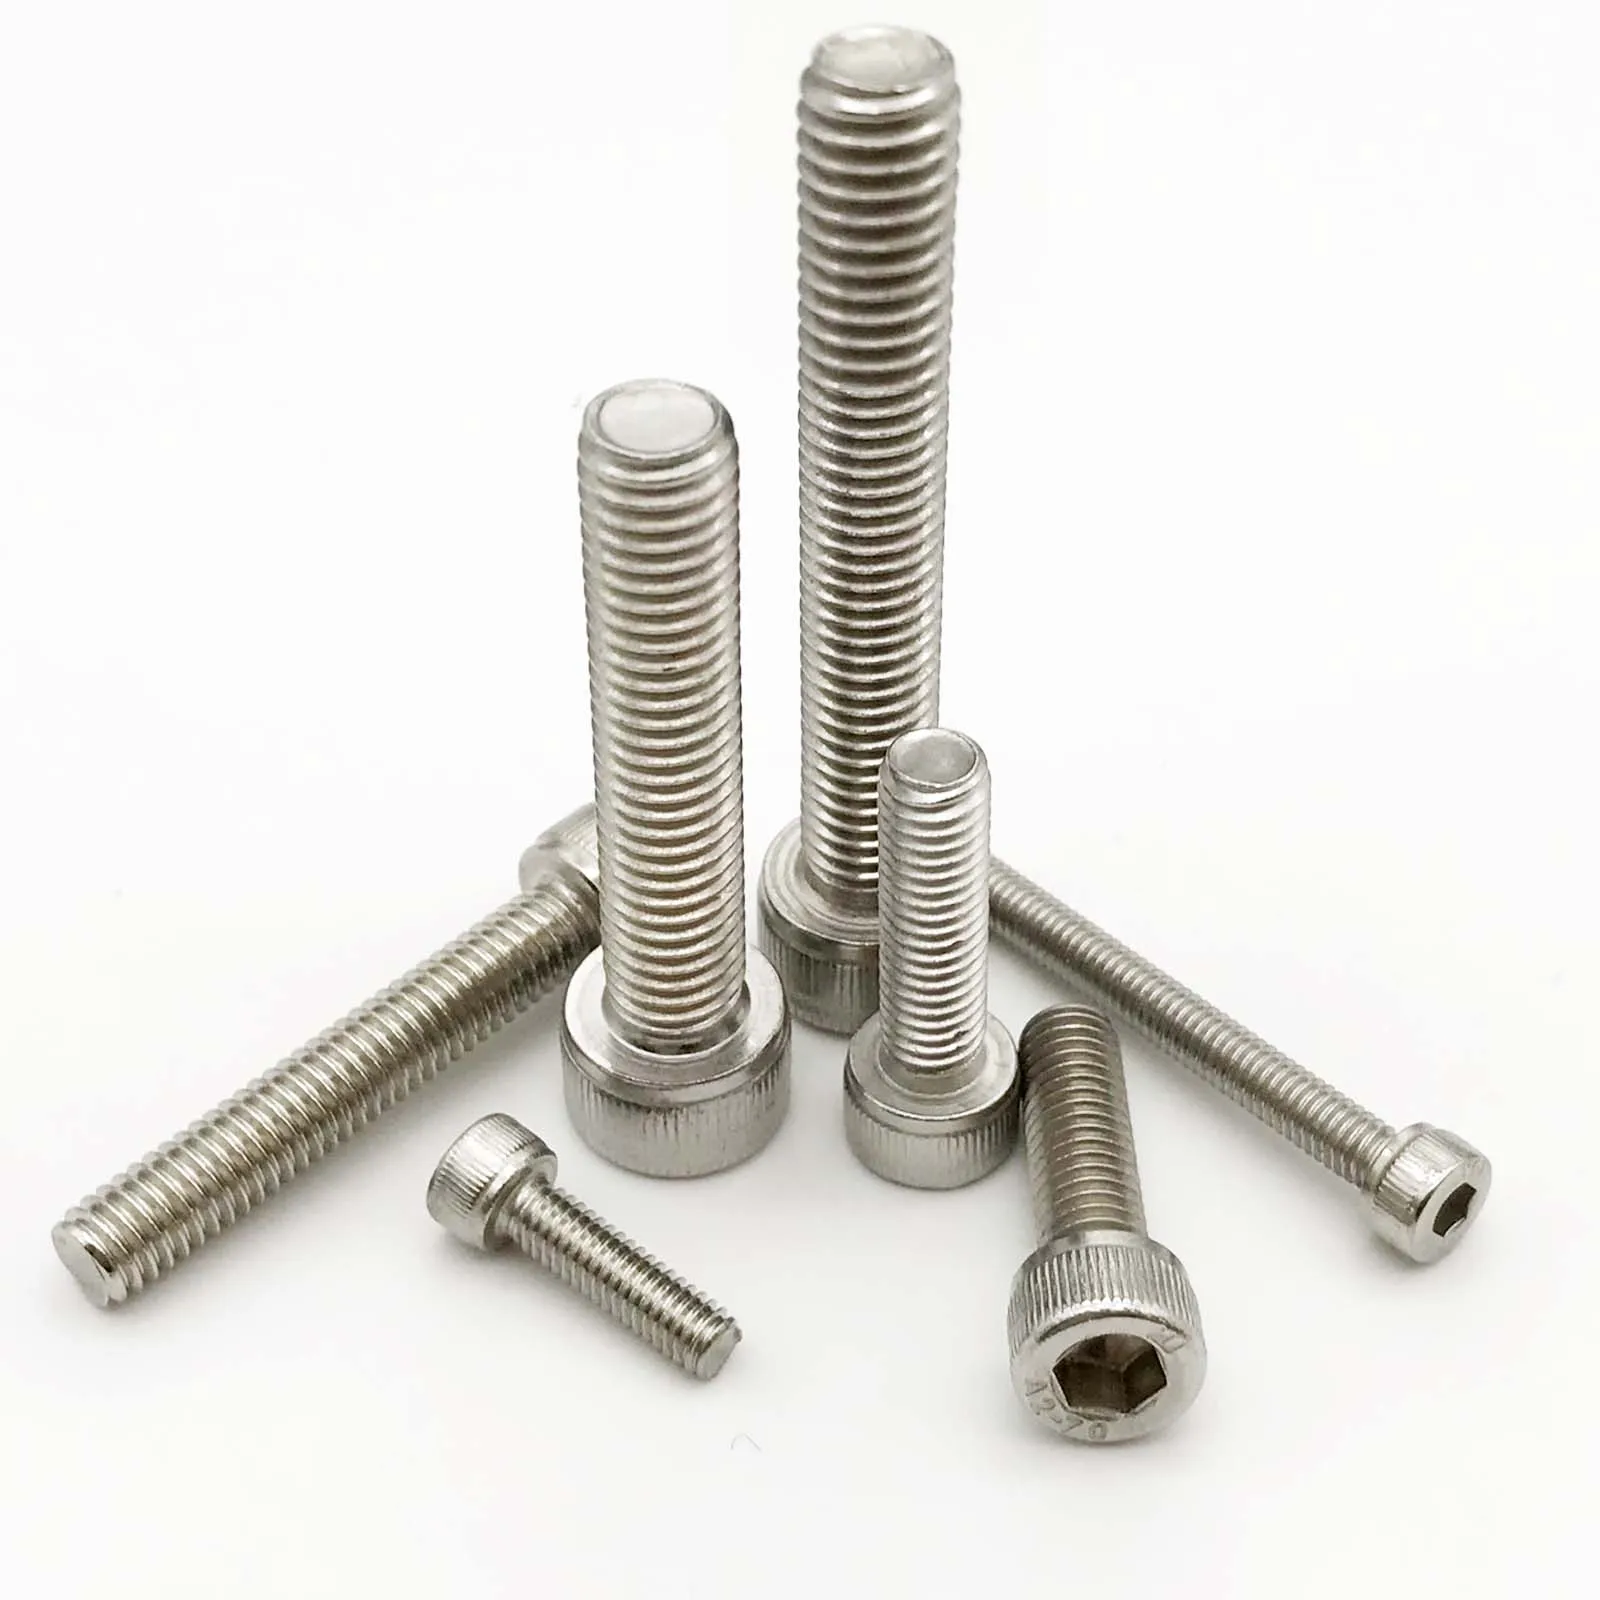 M12 12mm x 65mm A2 Stainless Steel Fully Threaded Hex Bolt Pack of 10 Setscrew